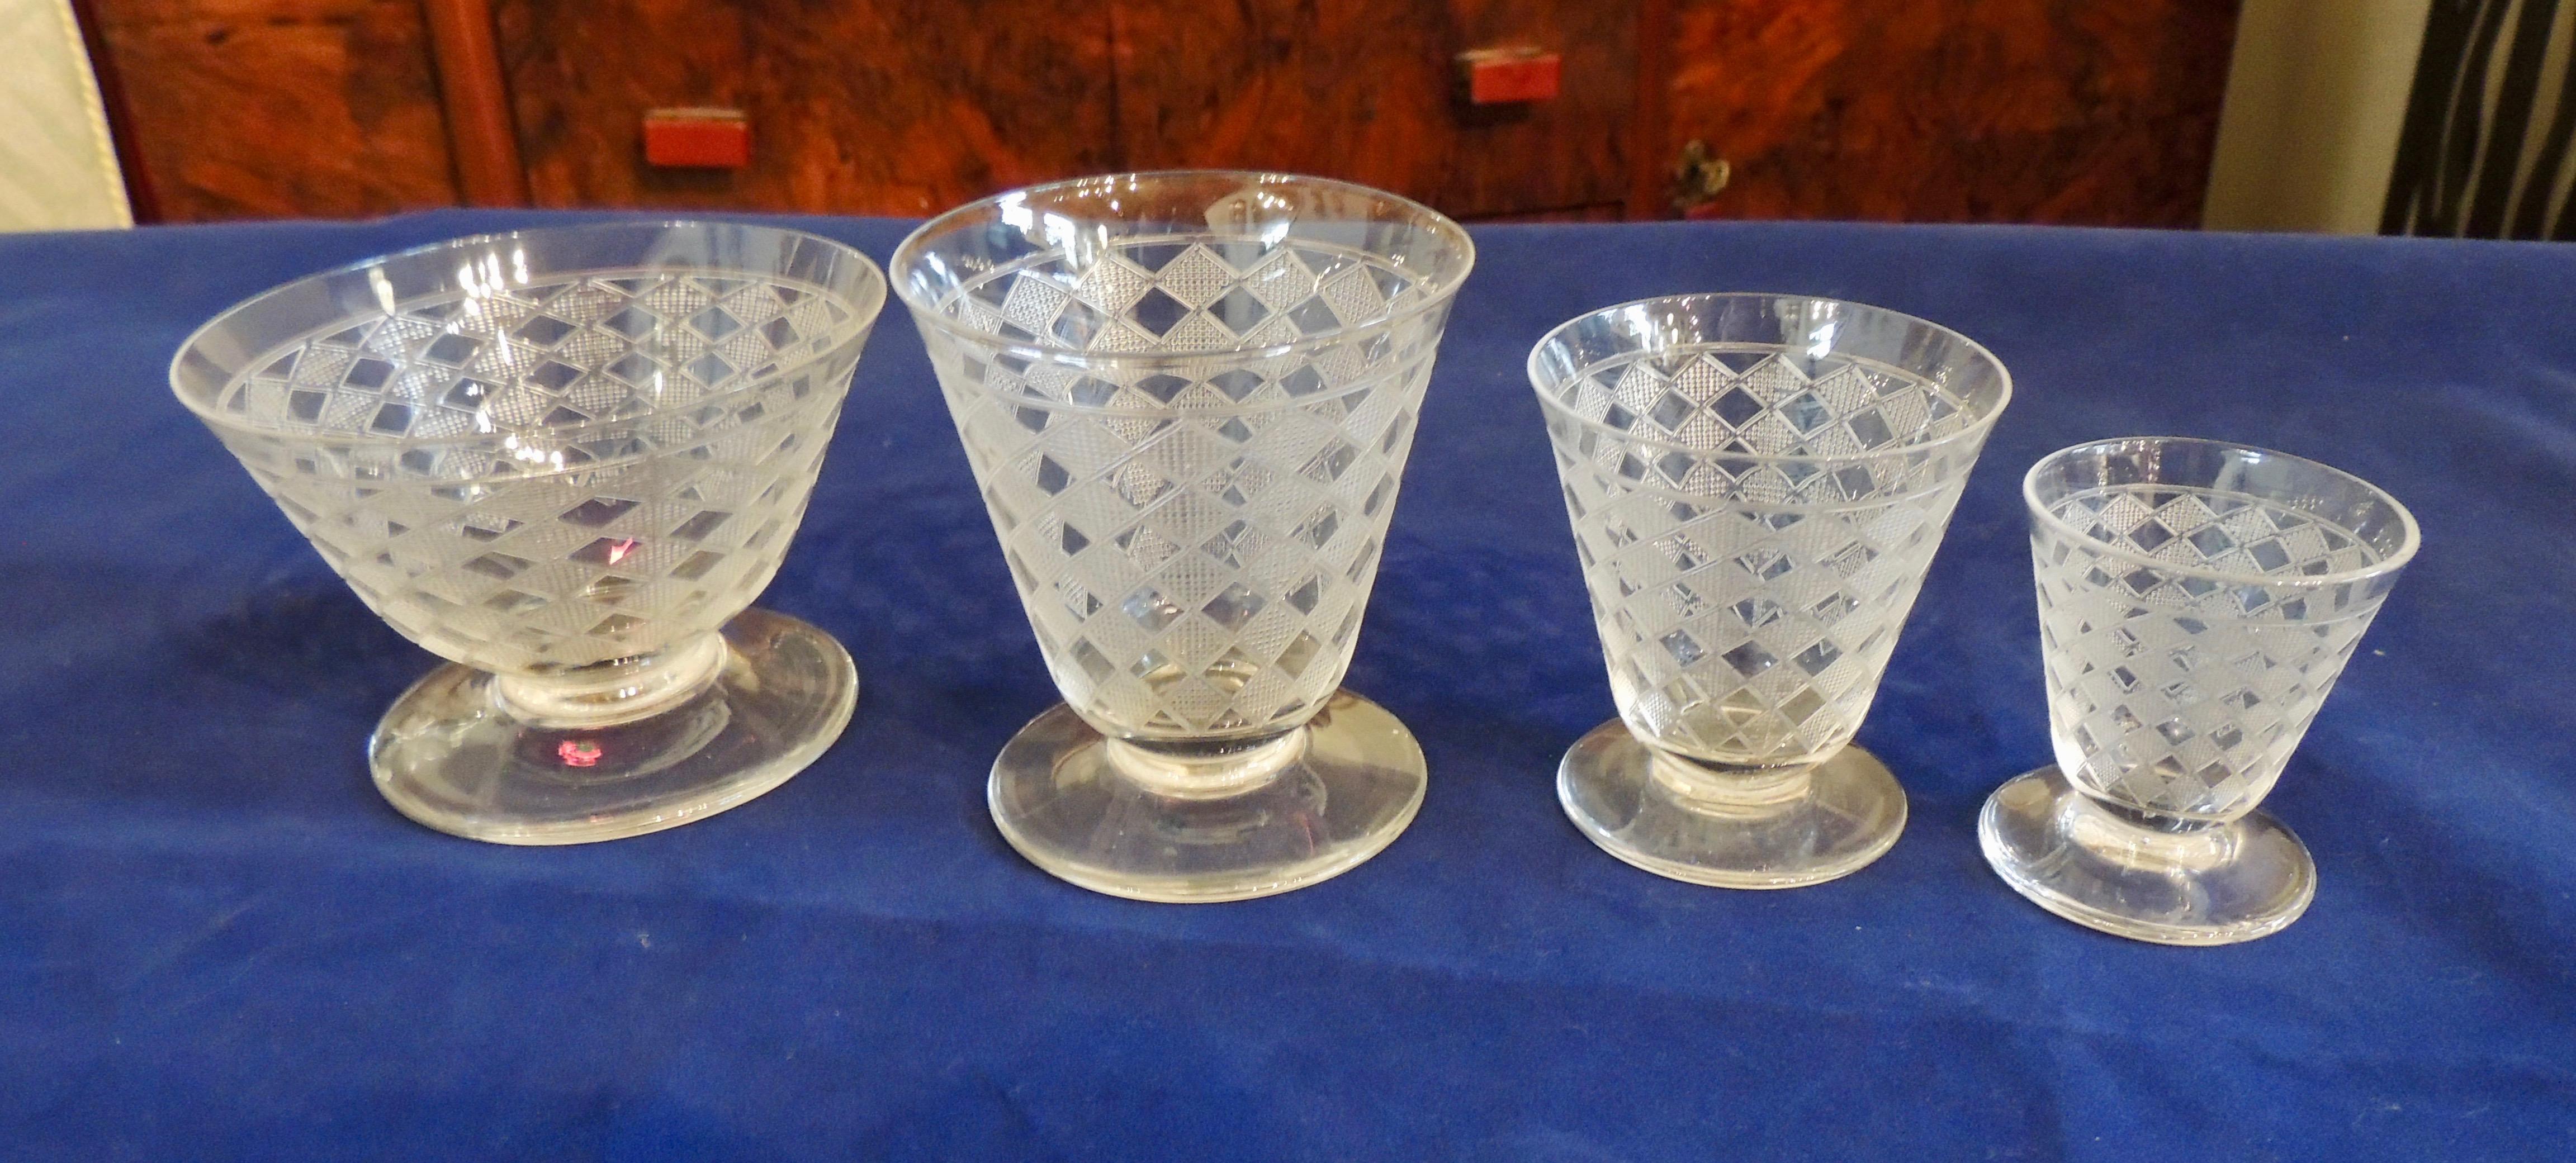 French Complete Set of Art Deco Baccarat Glassware